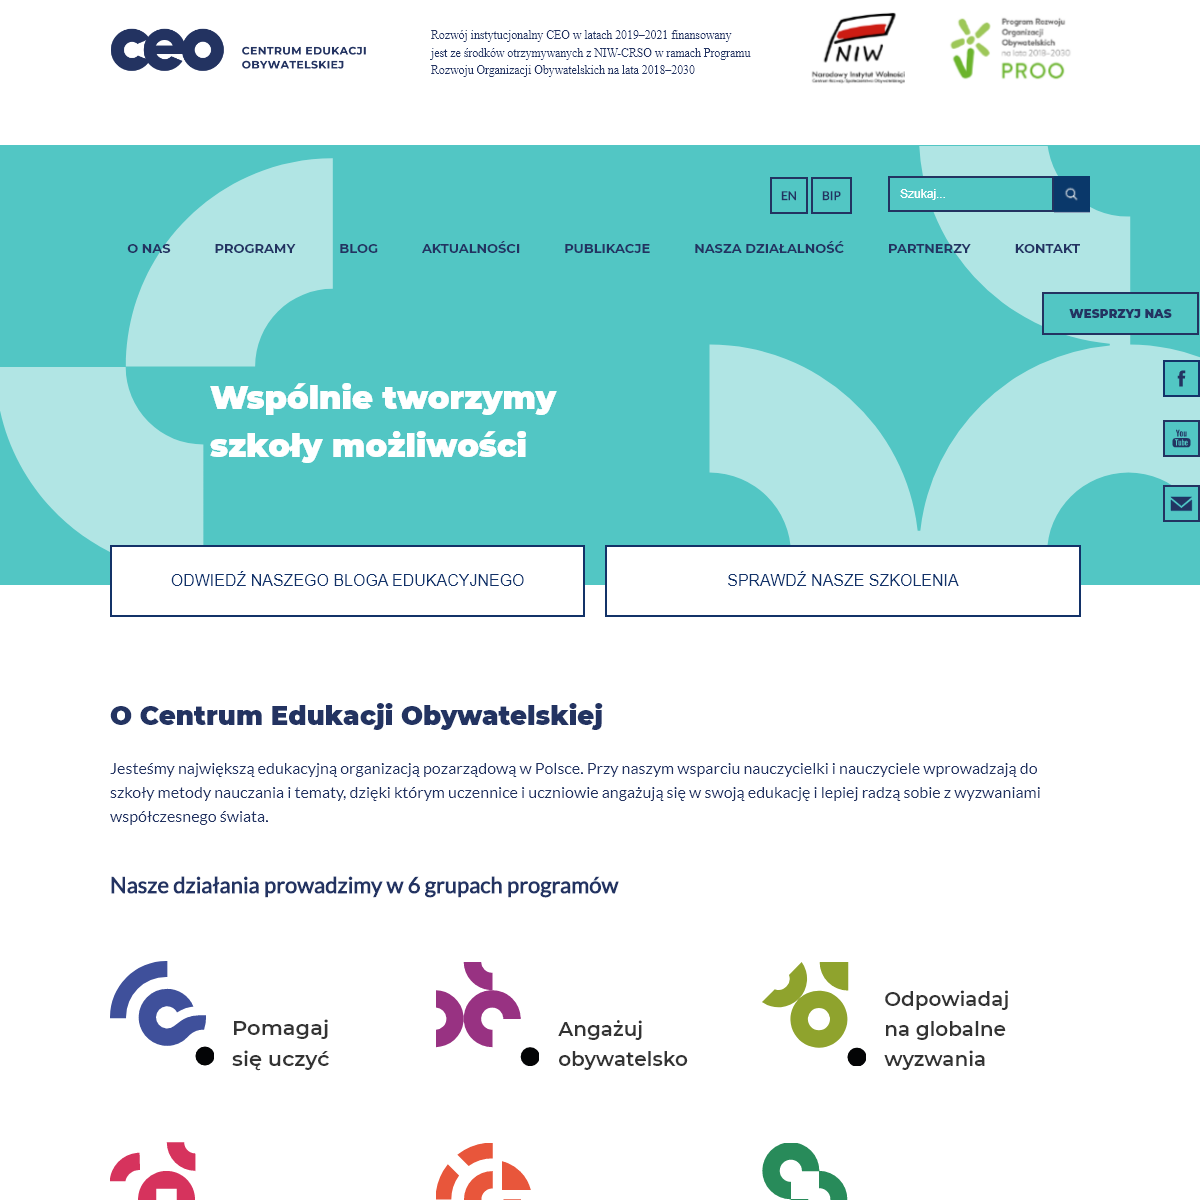 A complete backup of ceo.org.pl